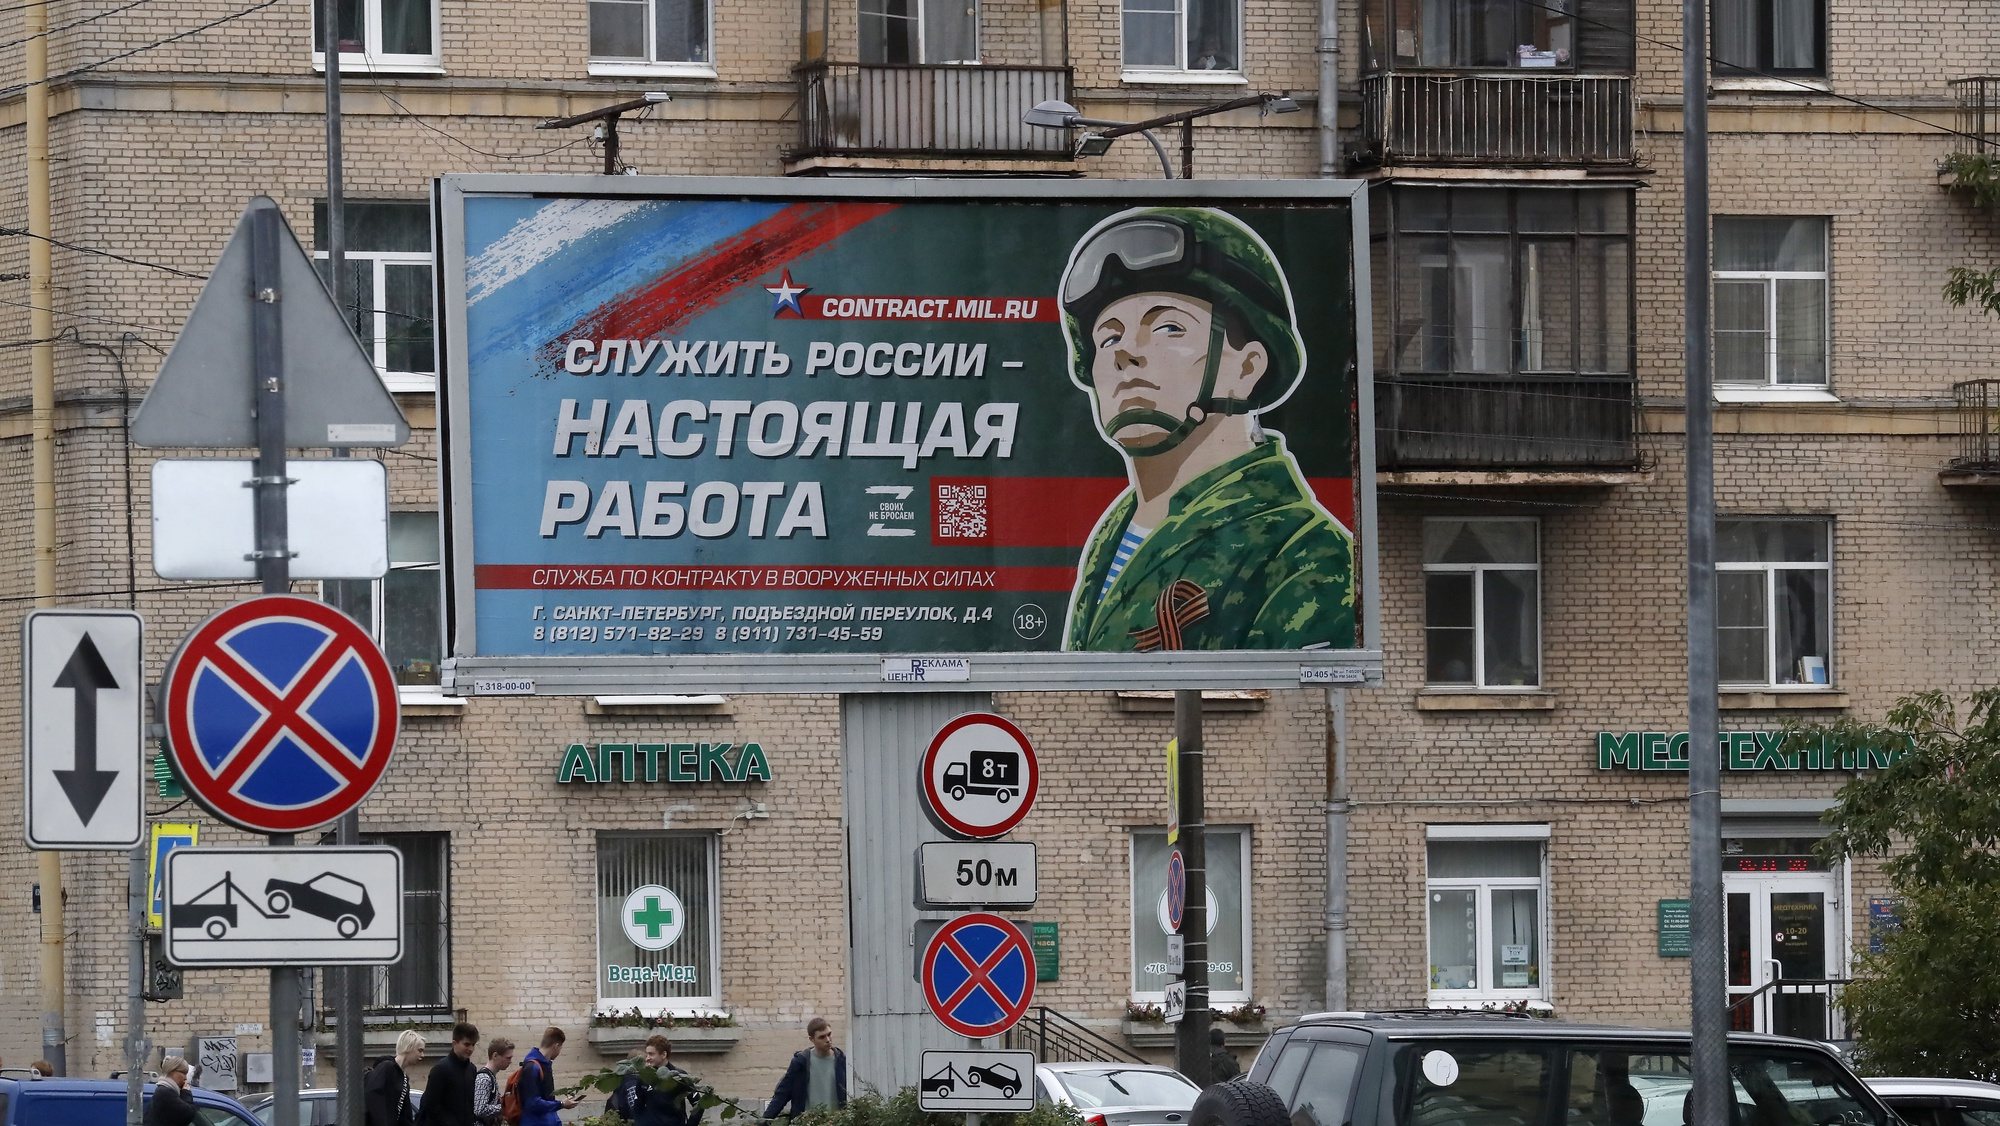 epa10213636 A billboard depicting a soldier with the slogan &#039;Serving Russia is a real job&#039; in St. Petersburg, Russia, 29 September 2022. Russian President Putin announced in a televised address to the nation on 21 September, that he signed a decree on partial mobilization in the Russian Federation due to the conflict in Ukraine. Russian Defense Minister Shoigu said that 300,000 people would be called up for service as part of the move.  EPA/ANATOLY MALTSEV